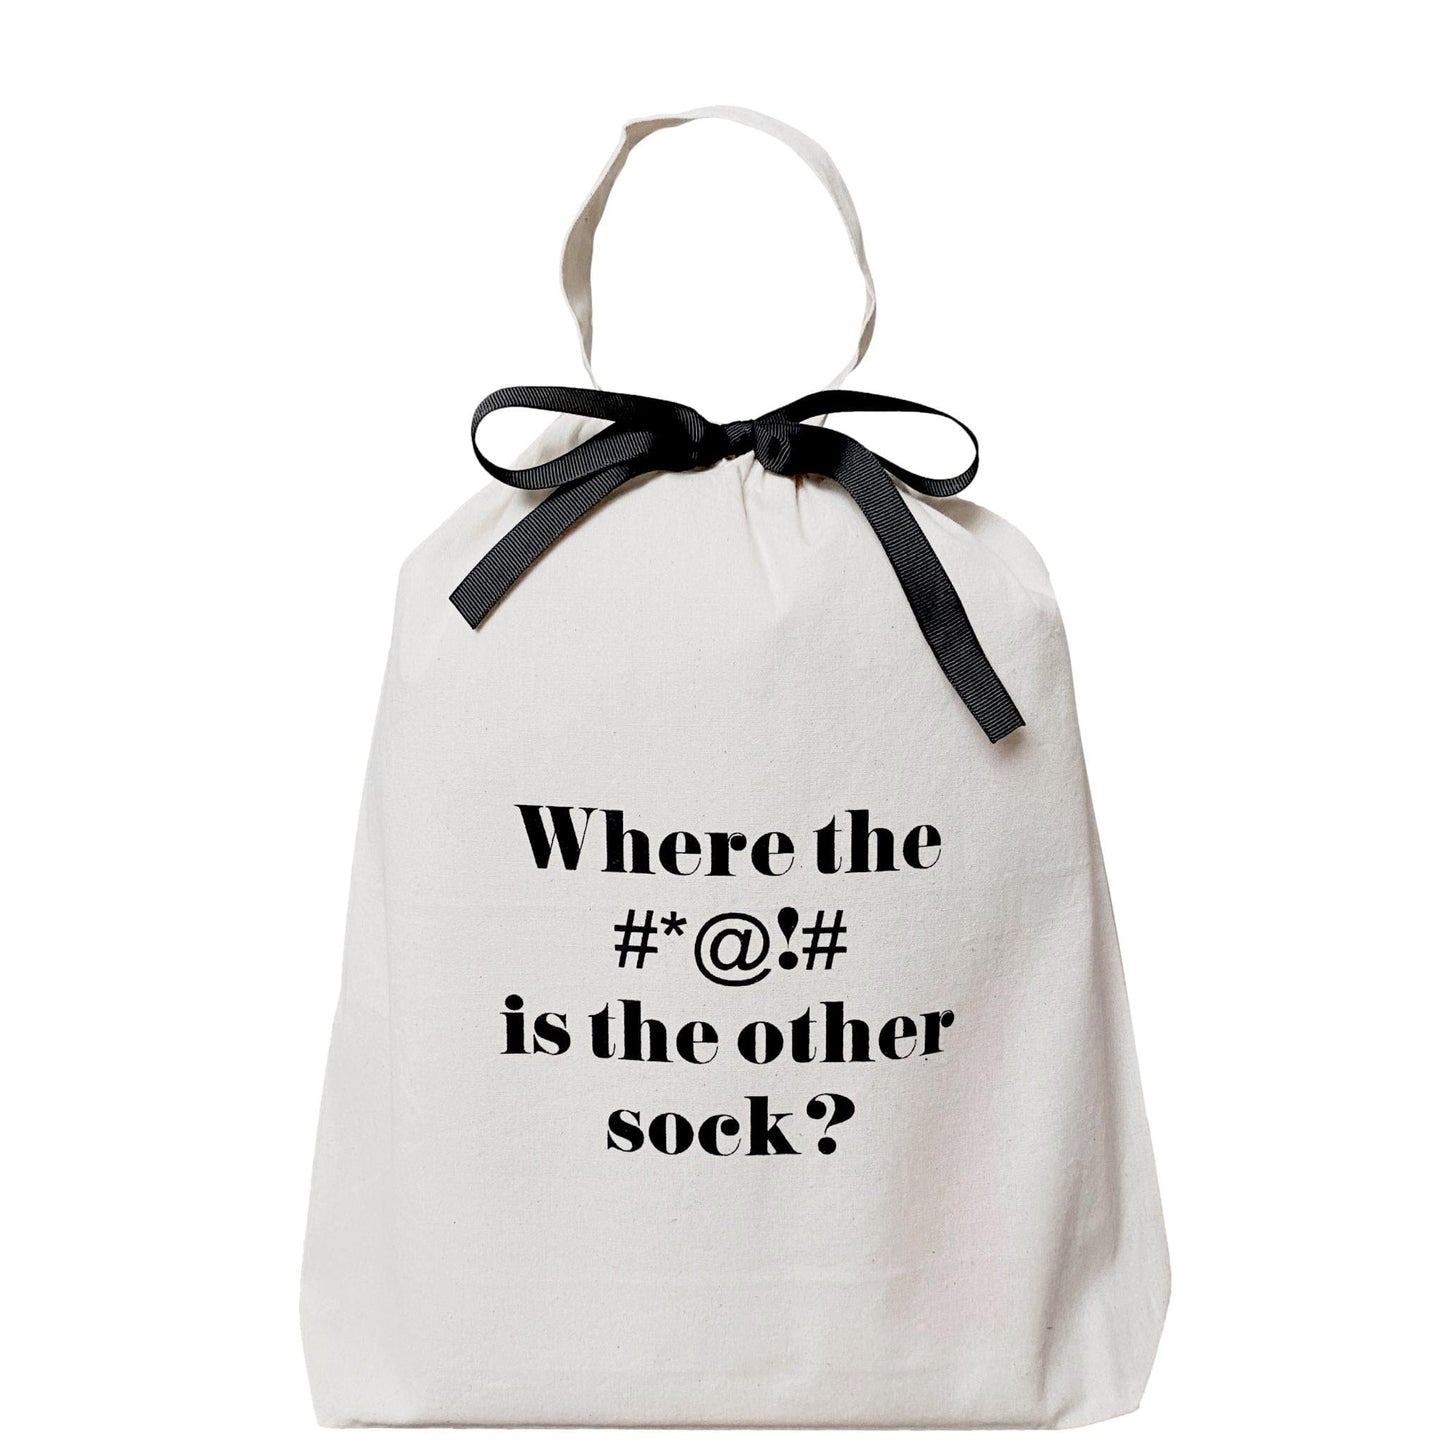 Lost sock organizing bag from Bag-all